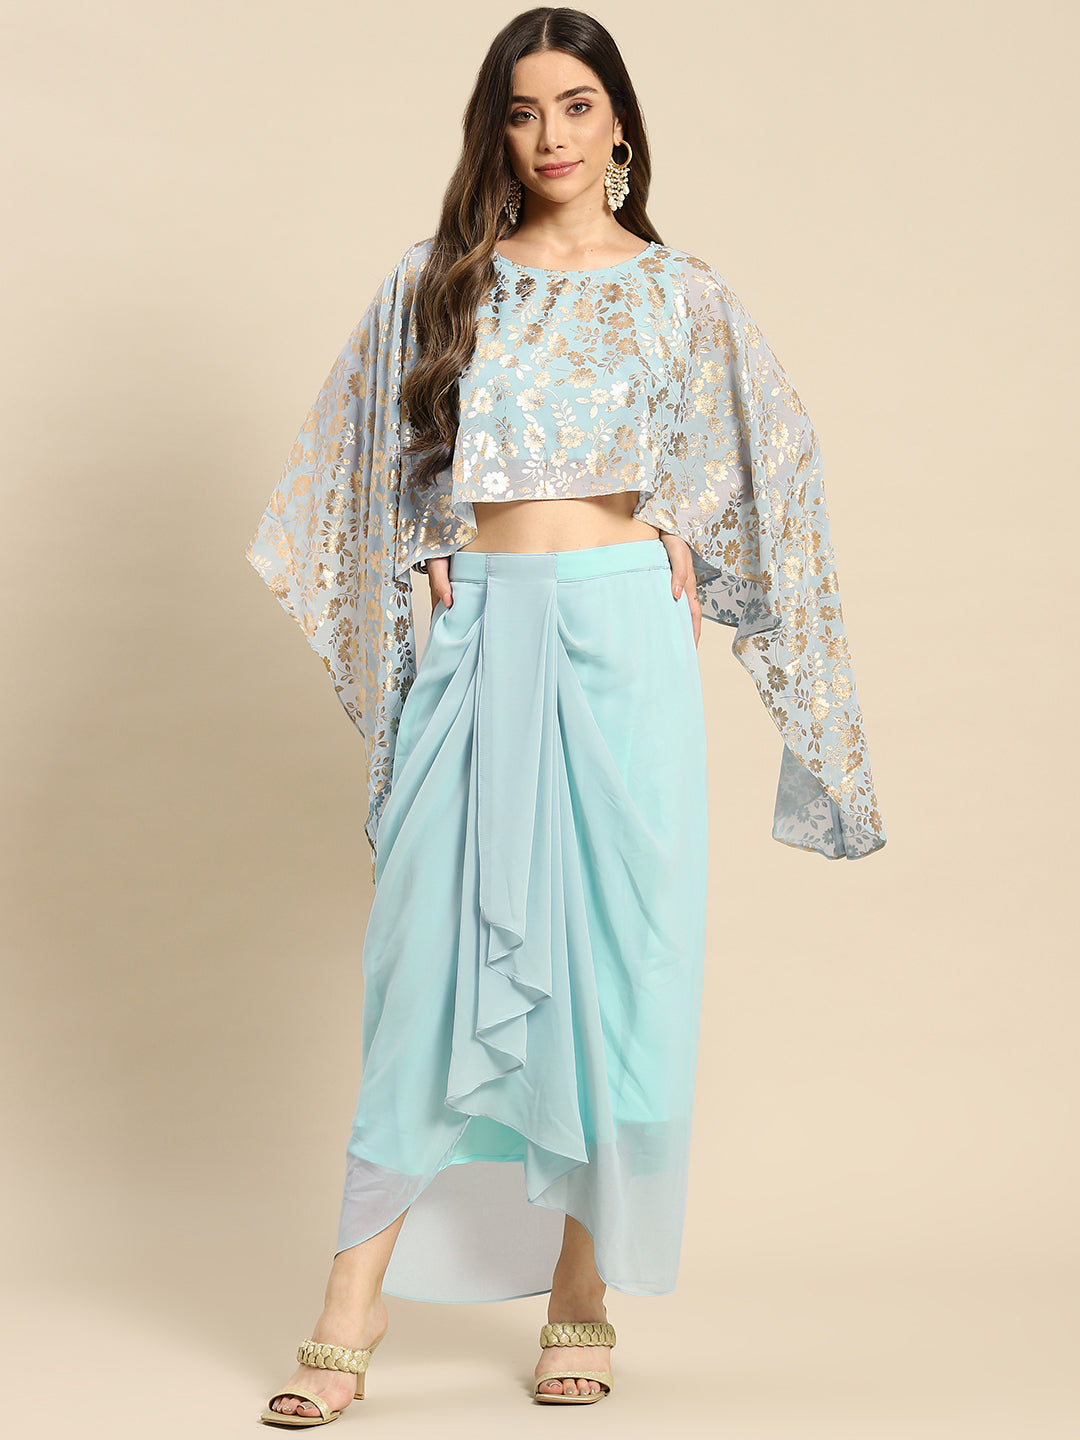 Cape top with draped skirt in Powder Blue